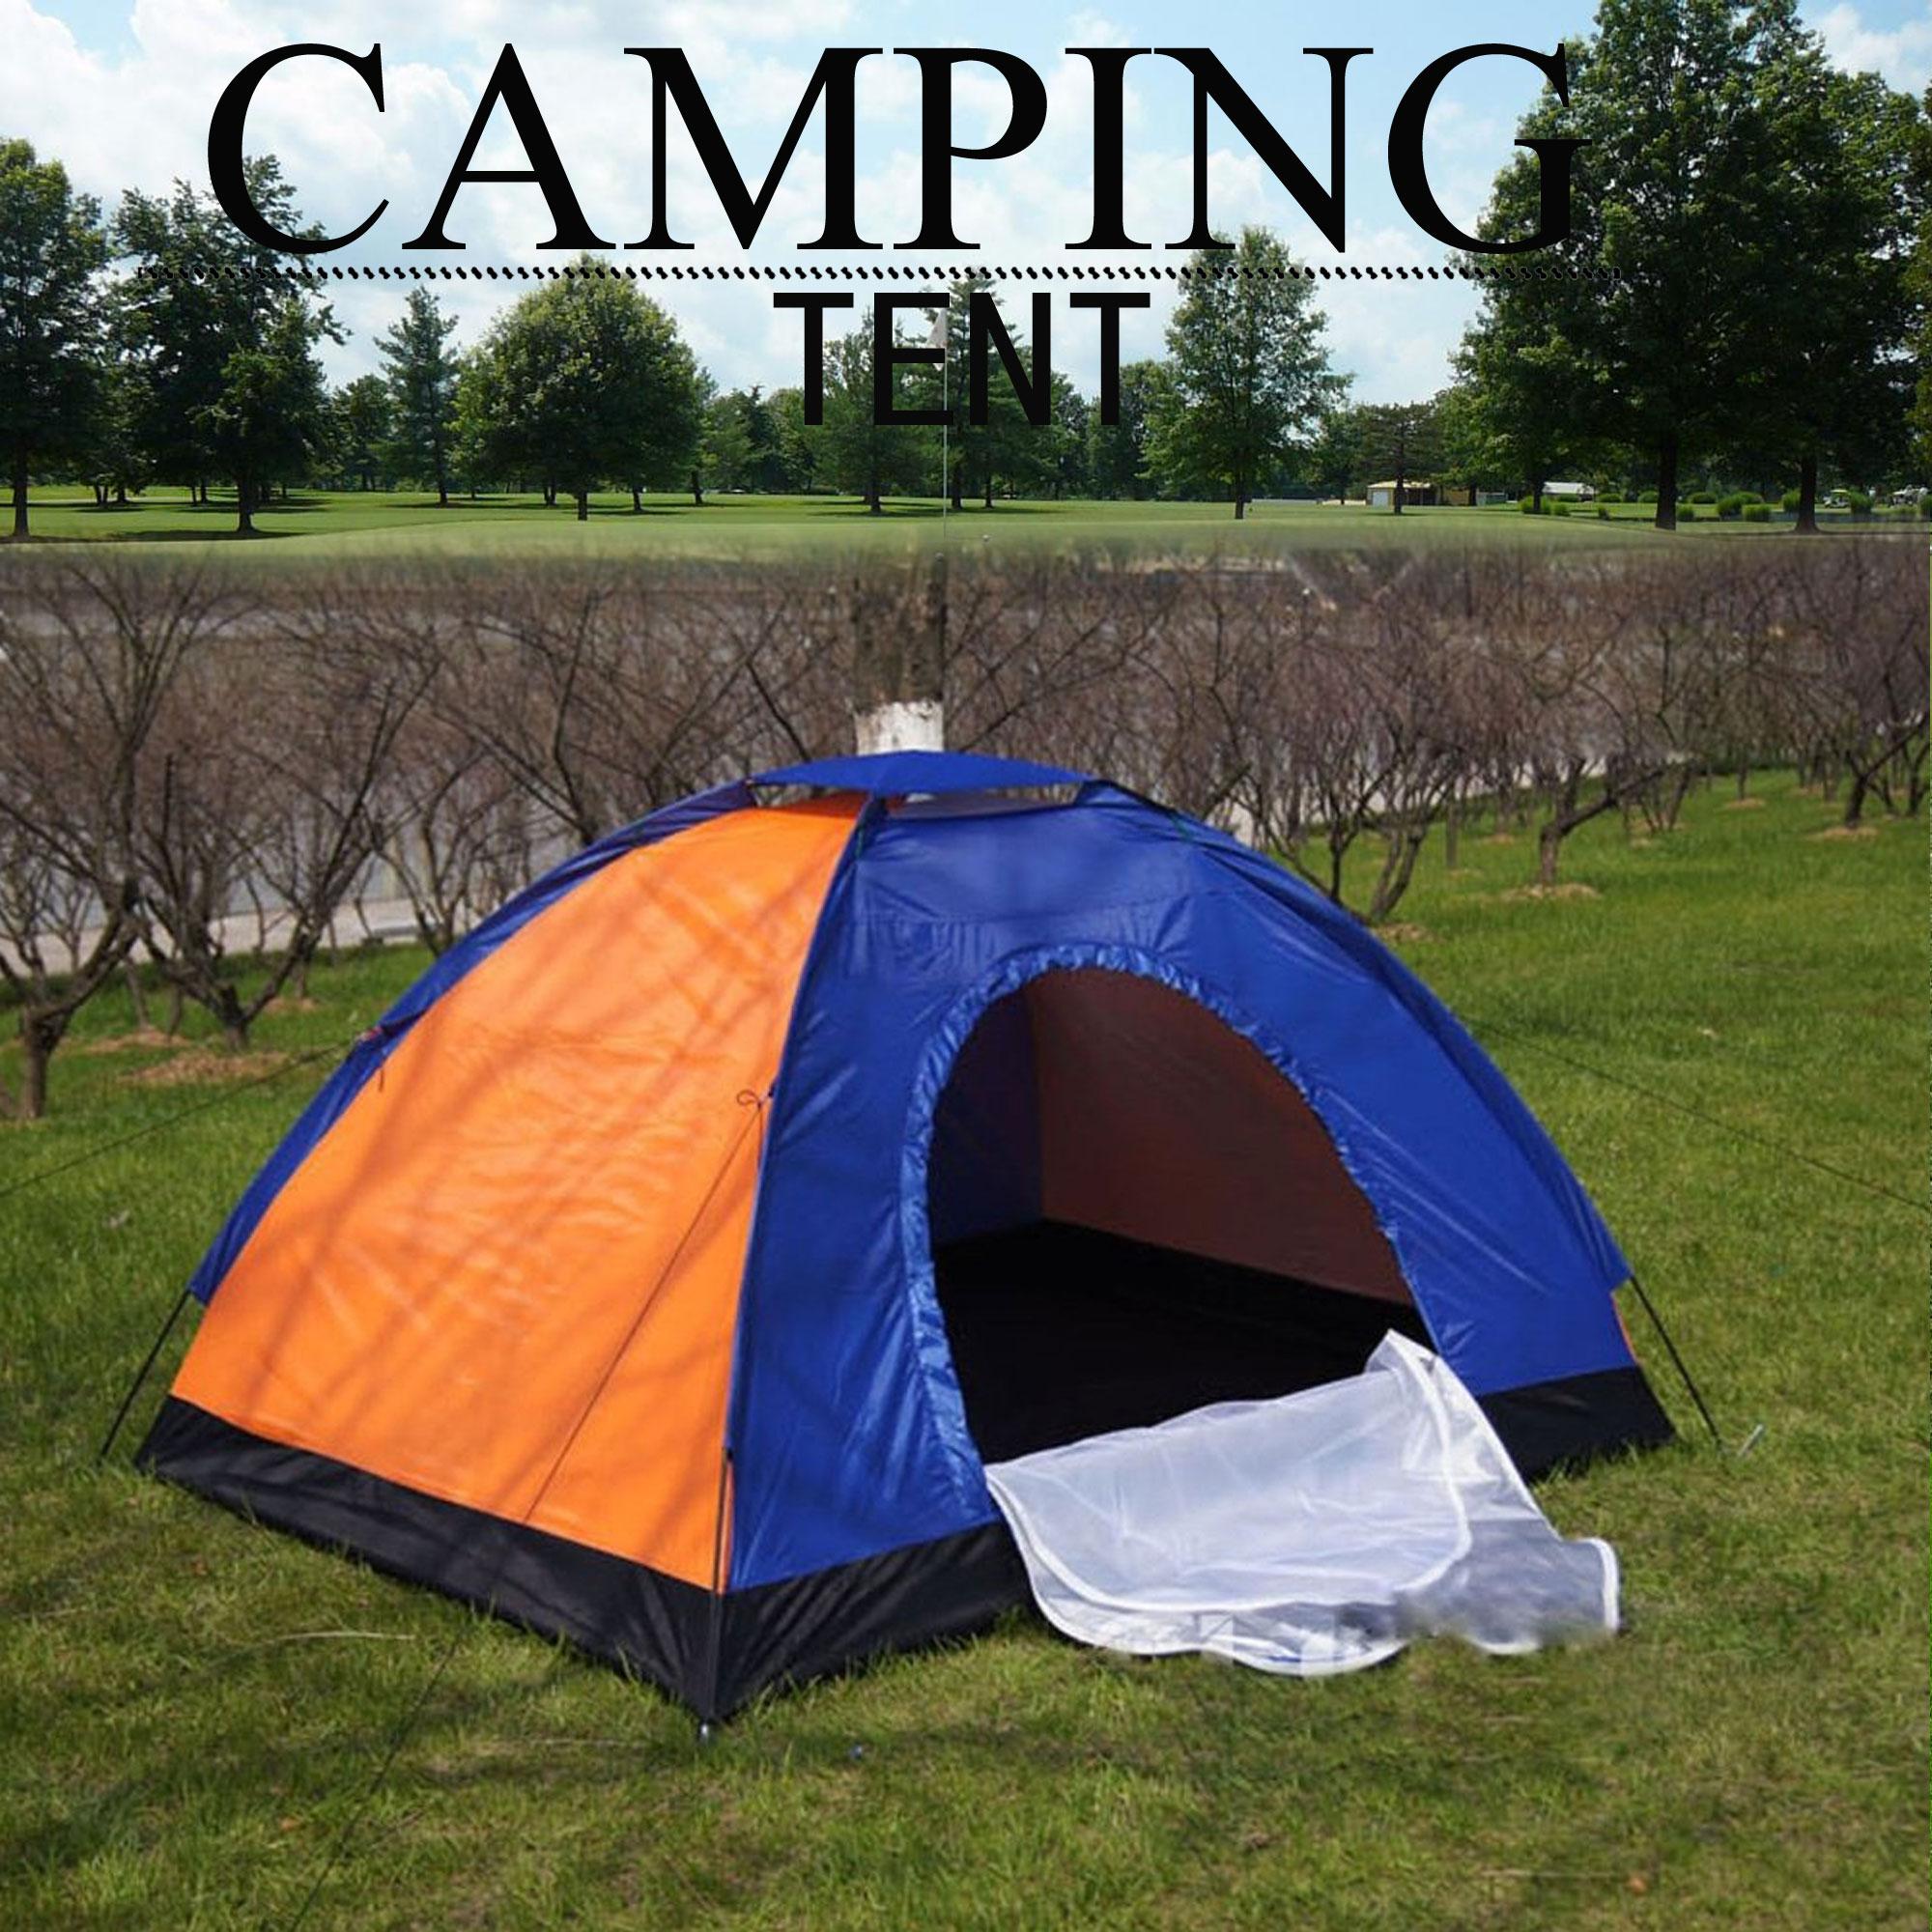 8 person camping tents for sale